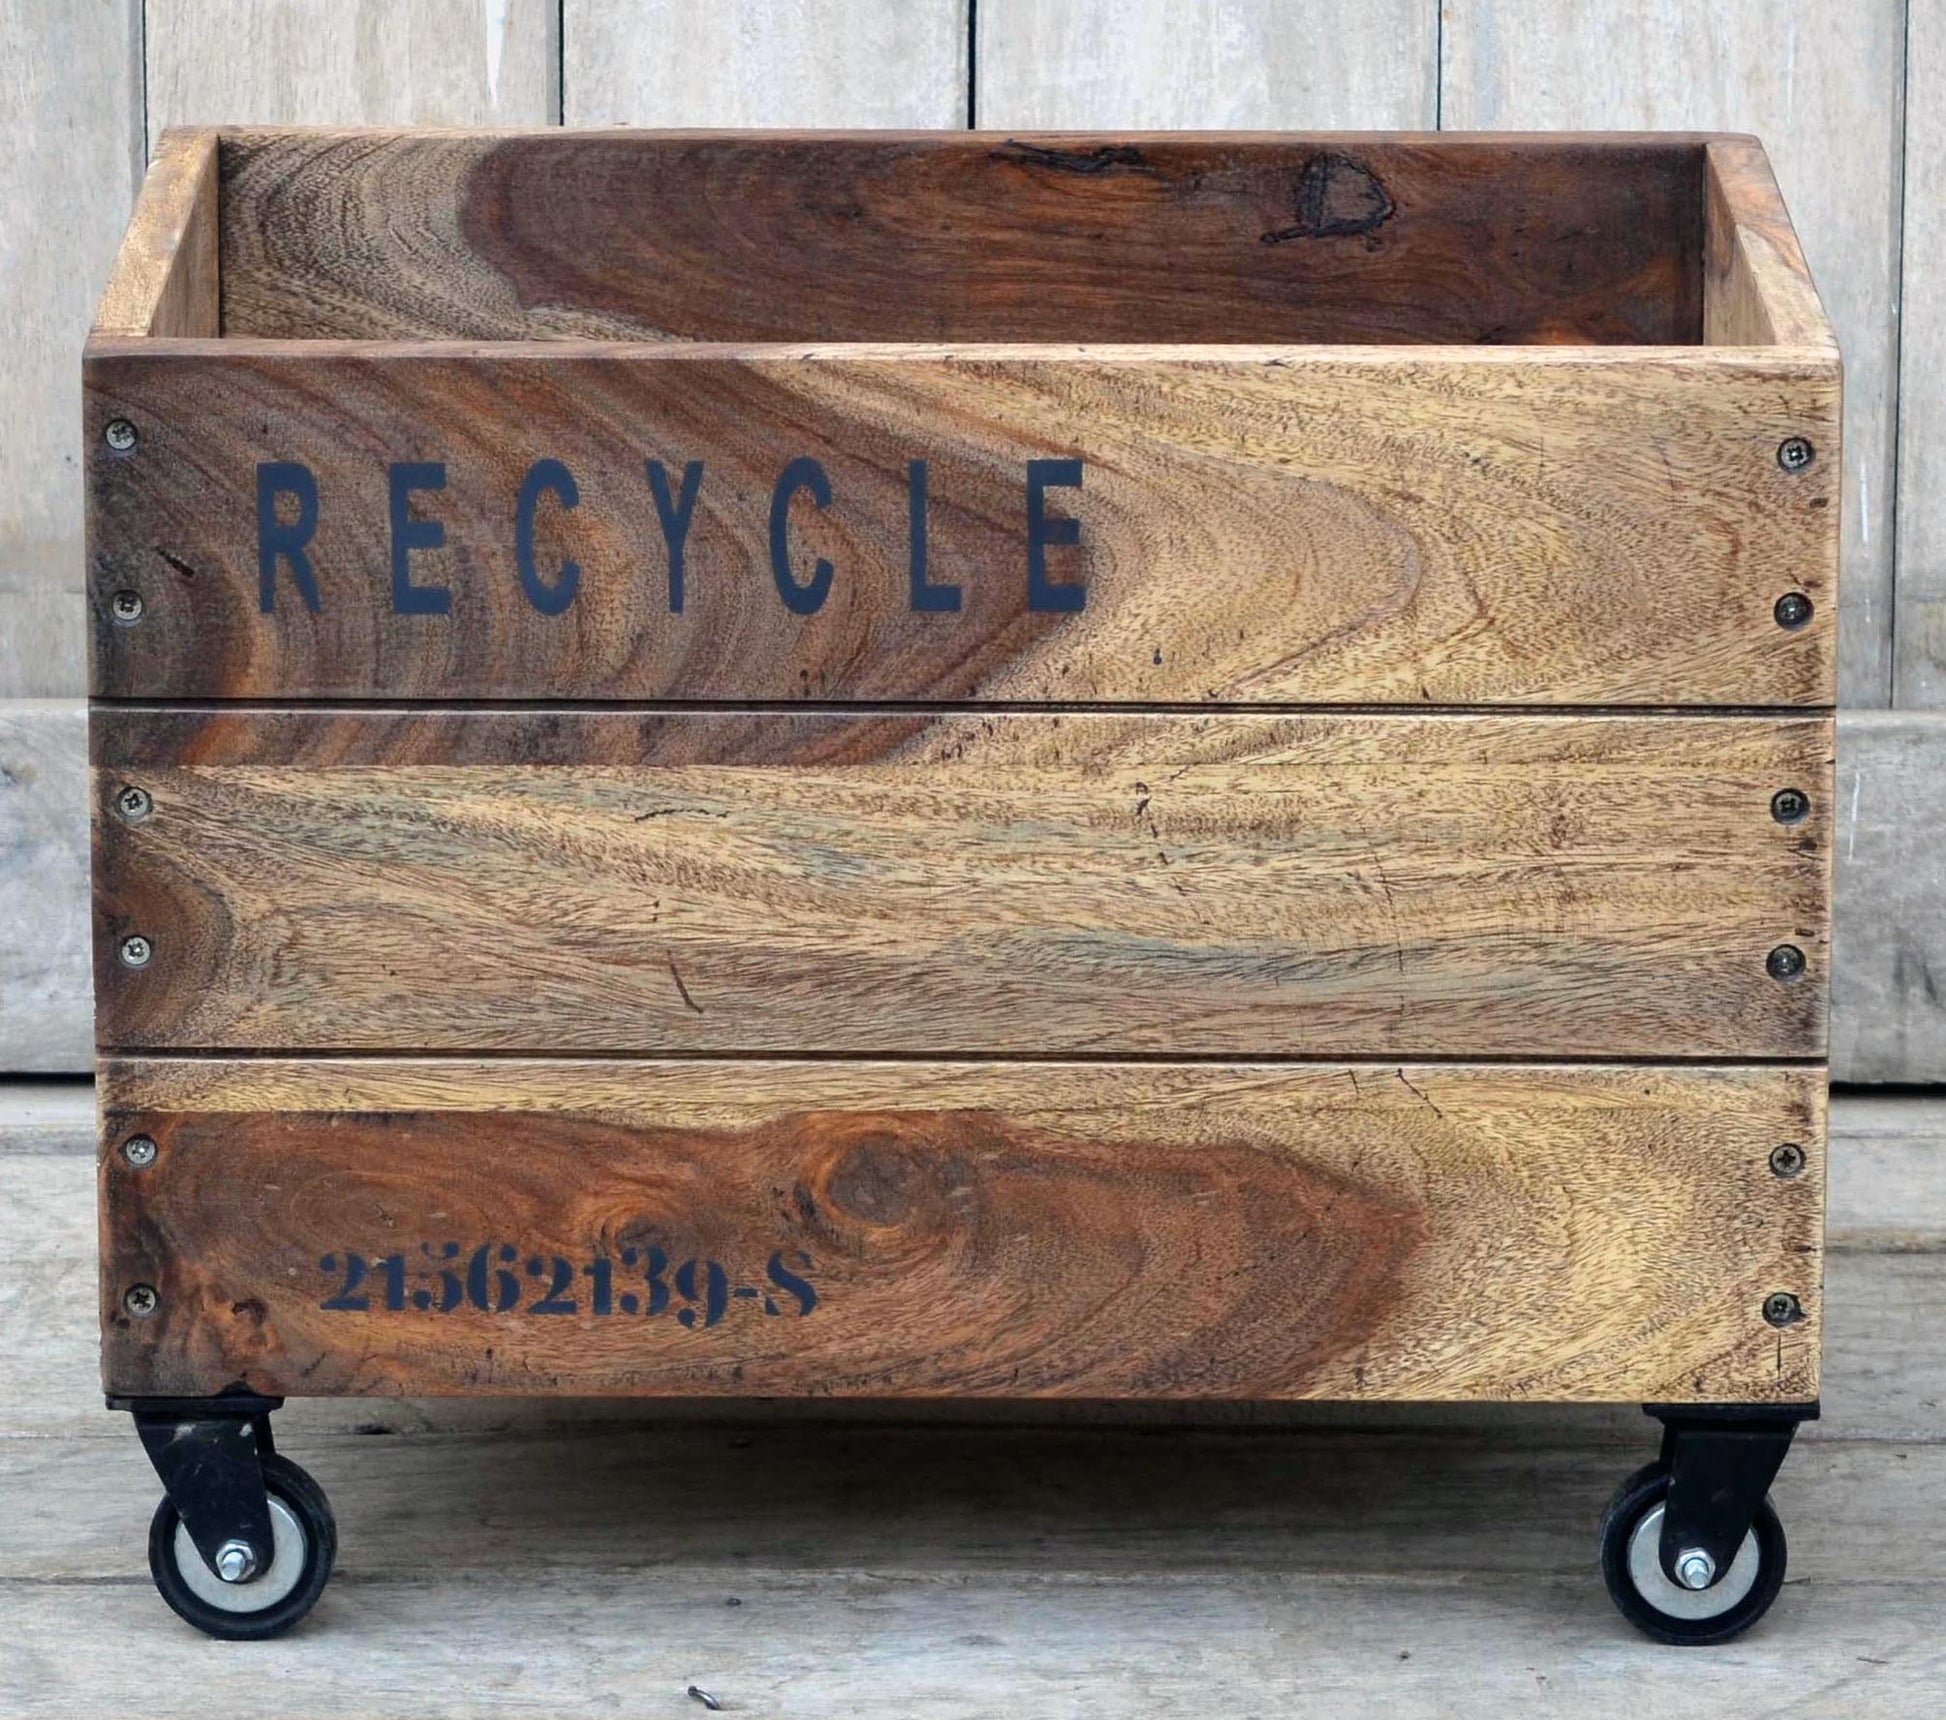 Wheely Recycle Storage Crate - decorstore